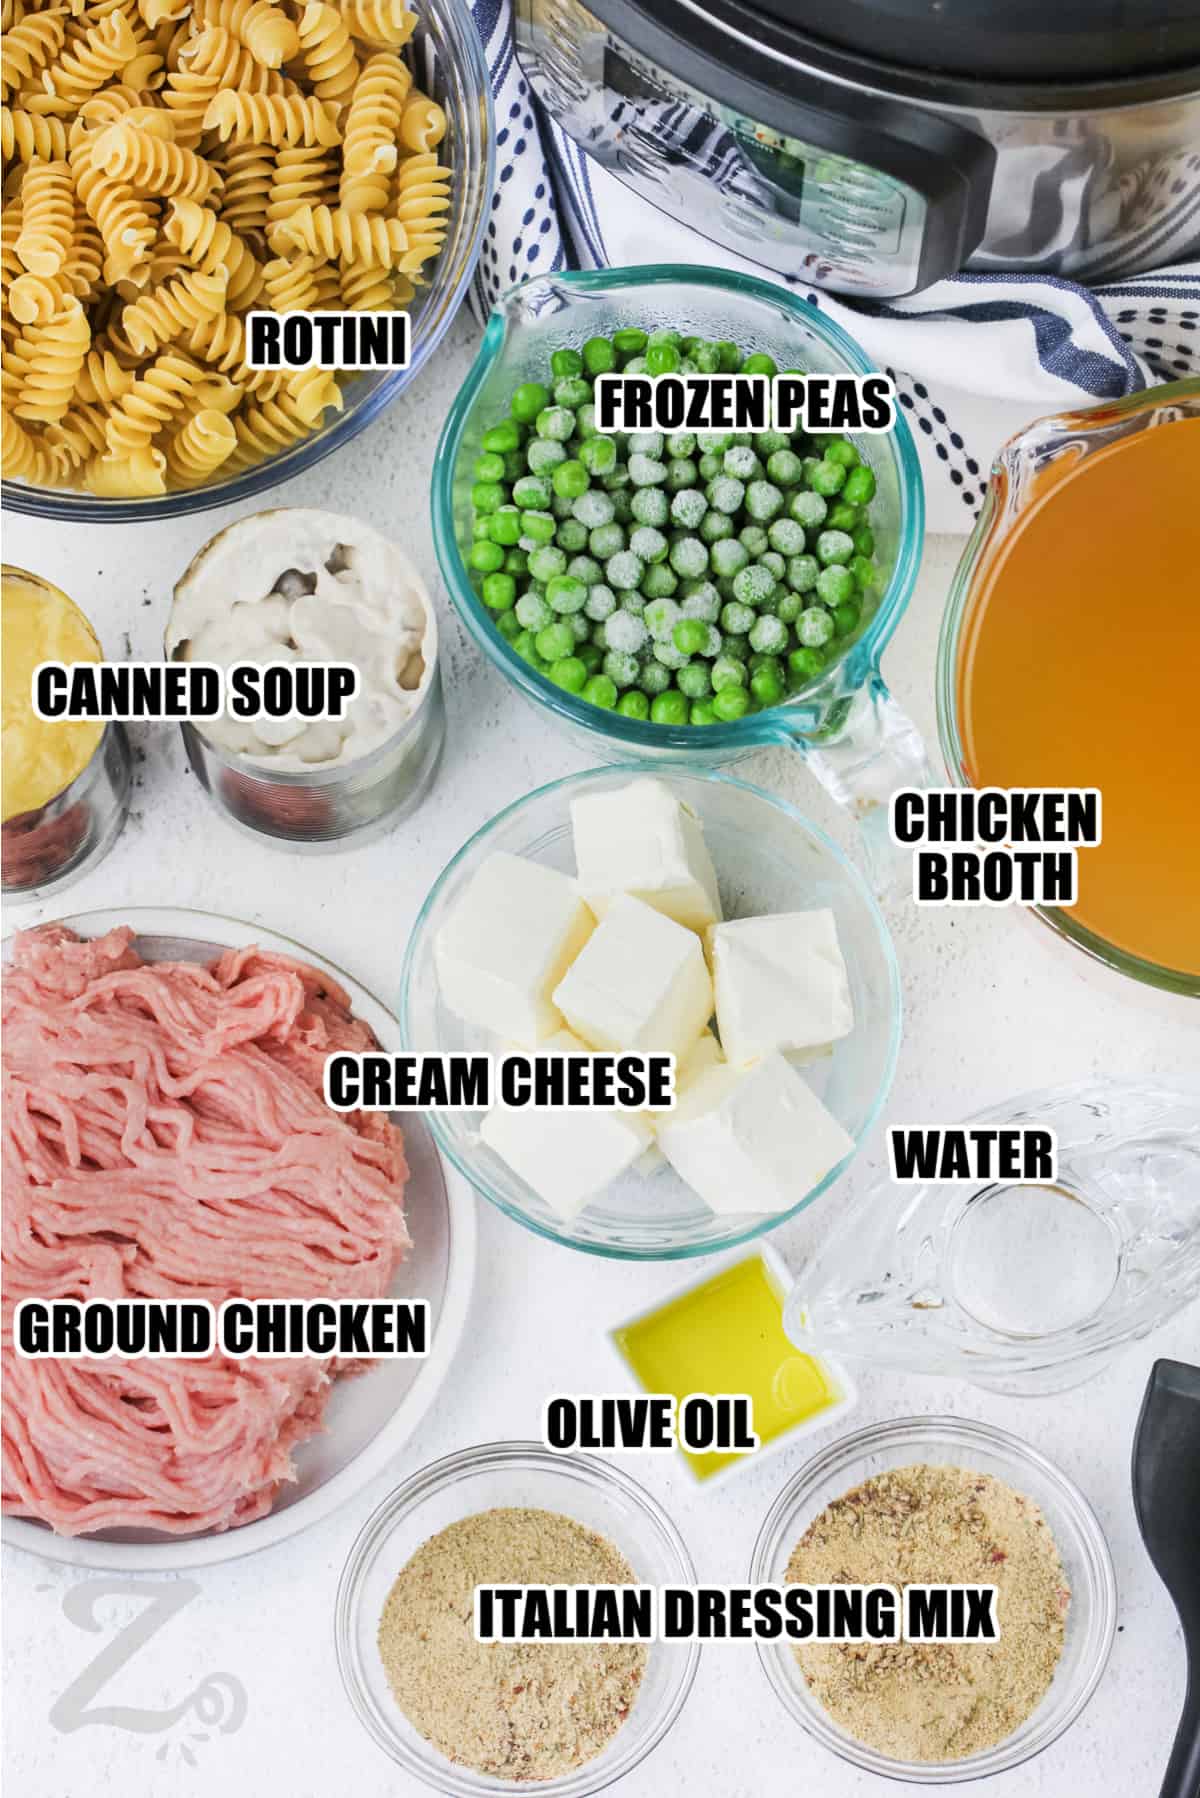 ingredients to make instant pot chicken and noodles labeled: frozen peas, rotini, chicken broth, canned soup, cream cheese, ground chicken, water, olive oil, Italian dressing mix